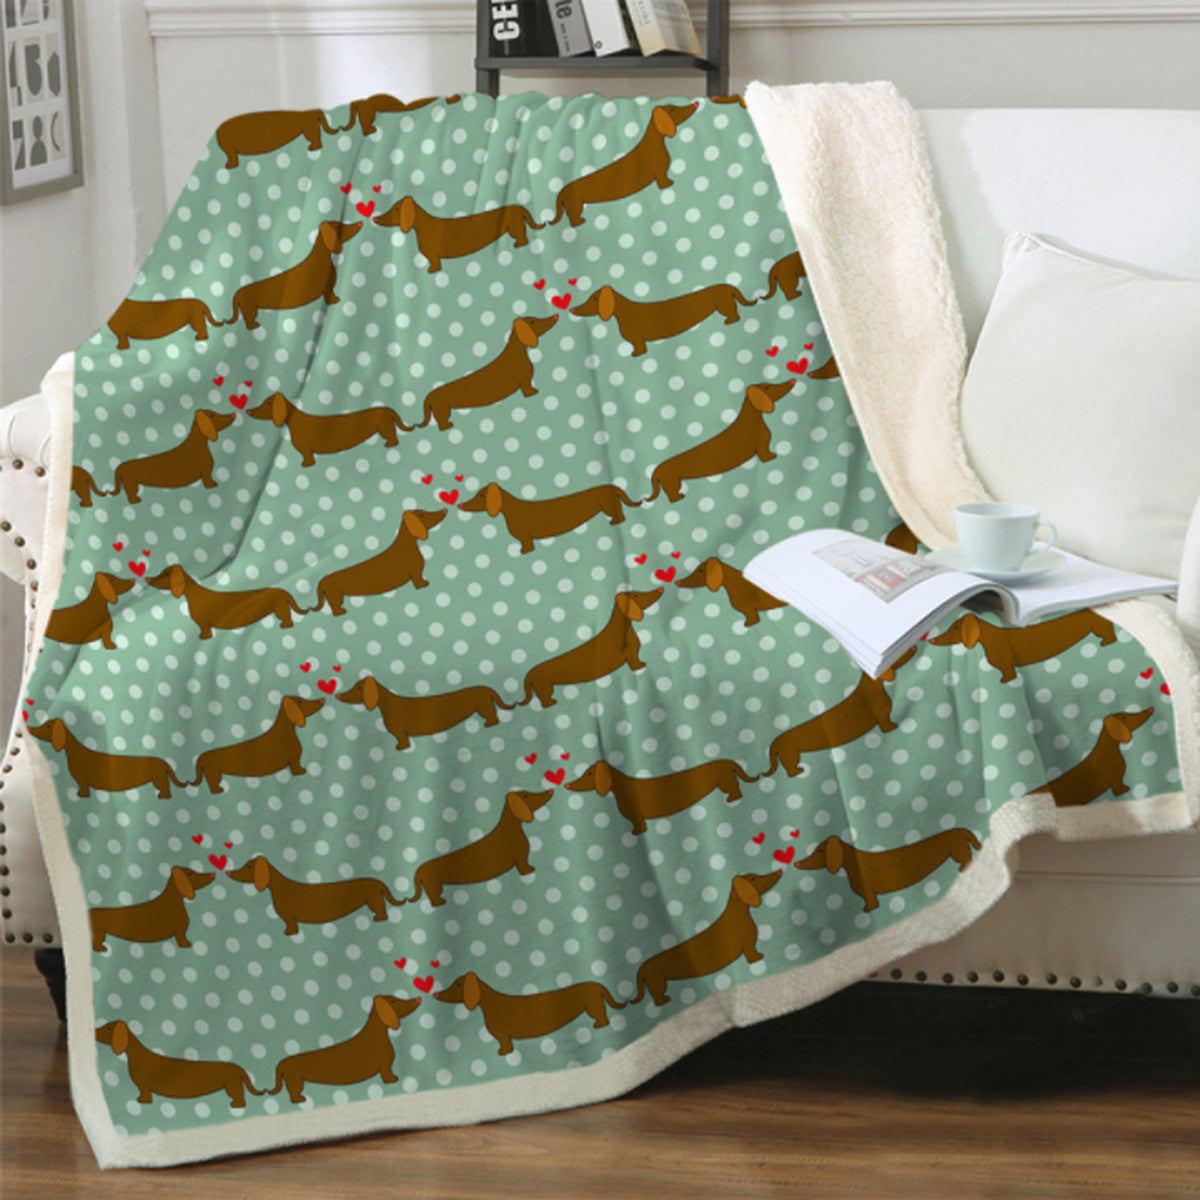 Cute Dog Print Fleece Blankets for Christmas-Blankets-1-3-40*60 inches-Free Shipping at meselling99